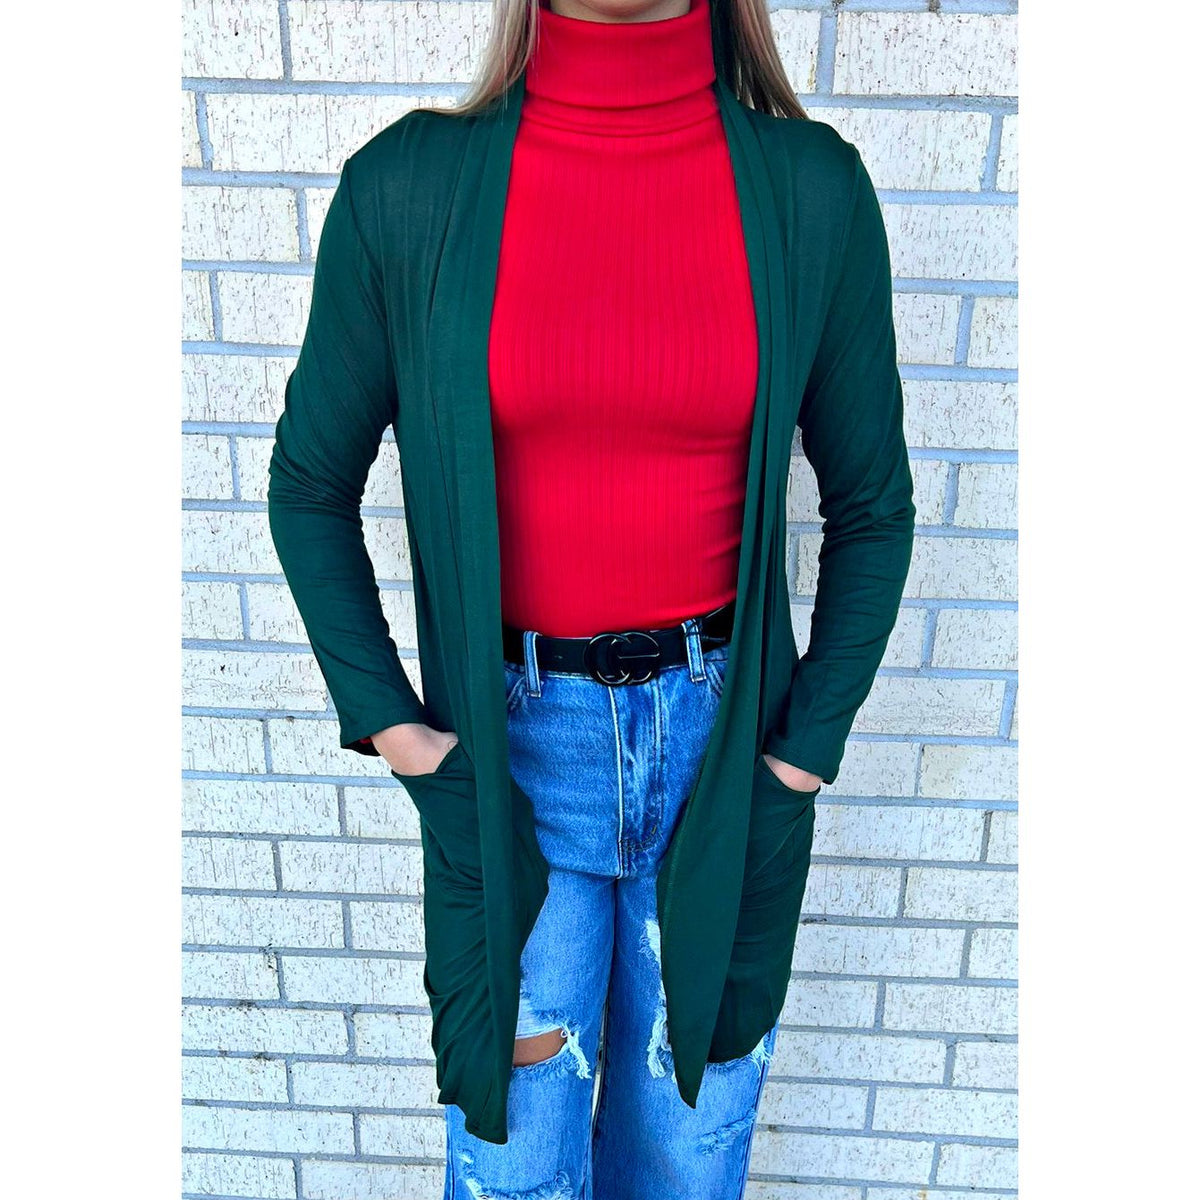 andi Red Turtle Neck Top